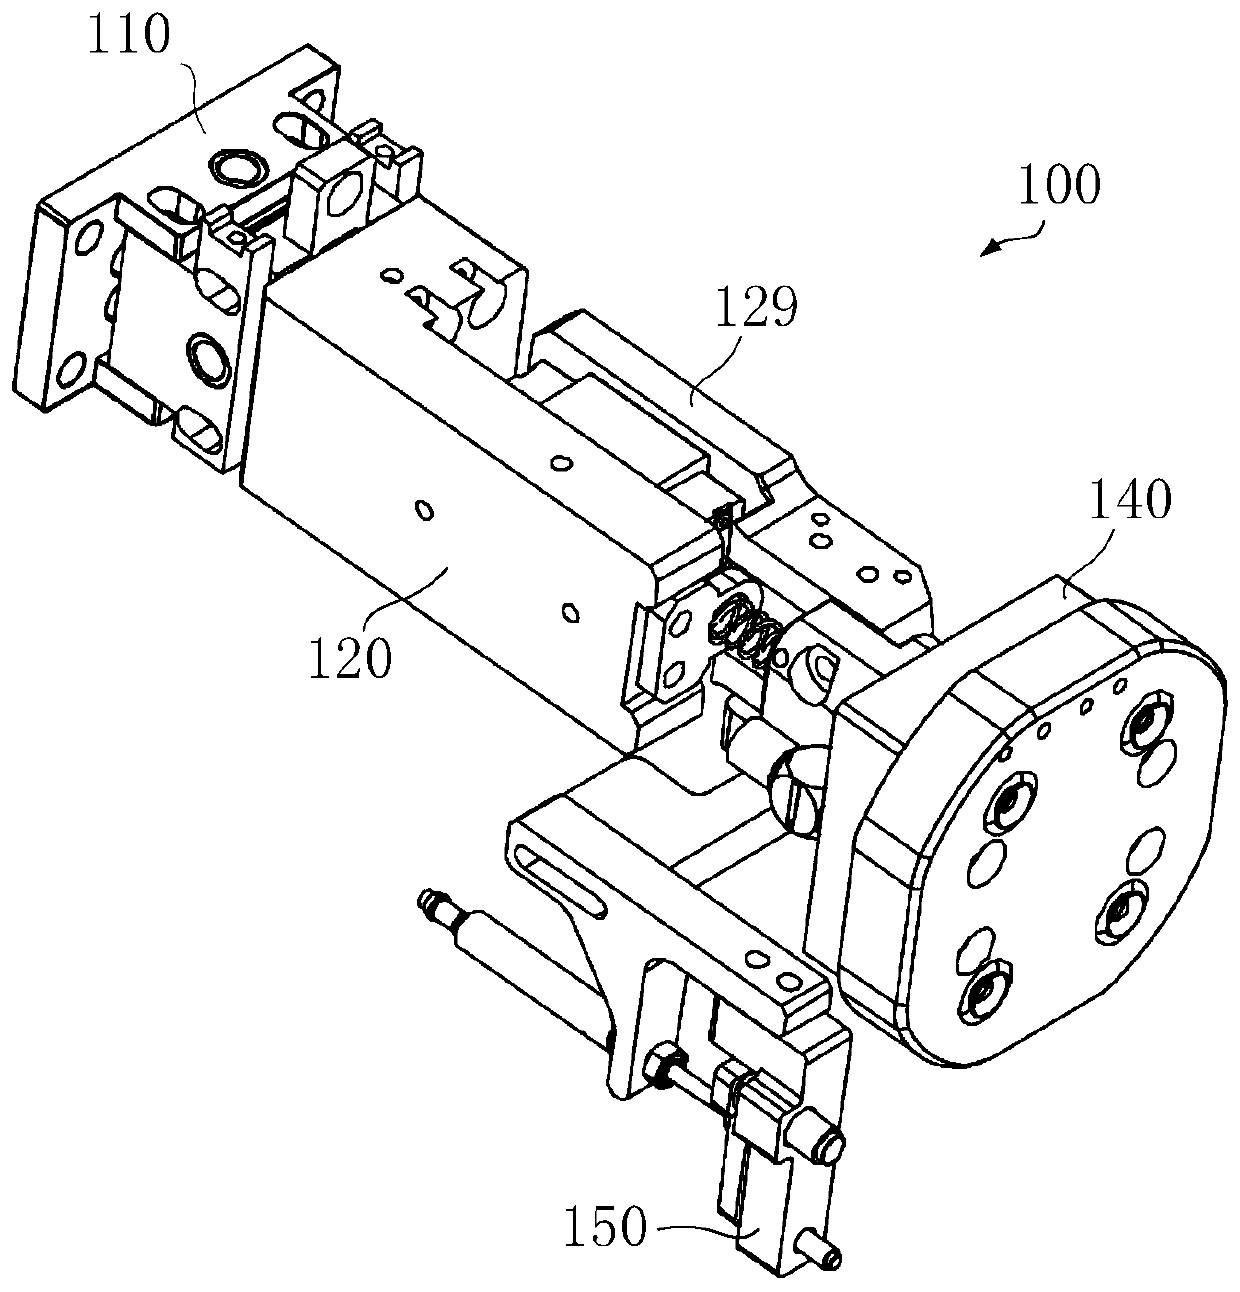 Pick-up mechanism for workpiece loading and unloading